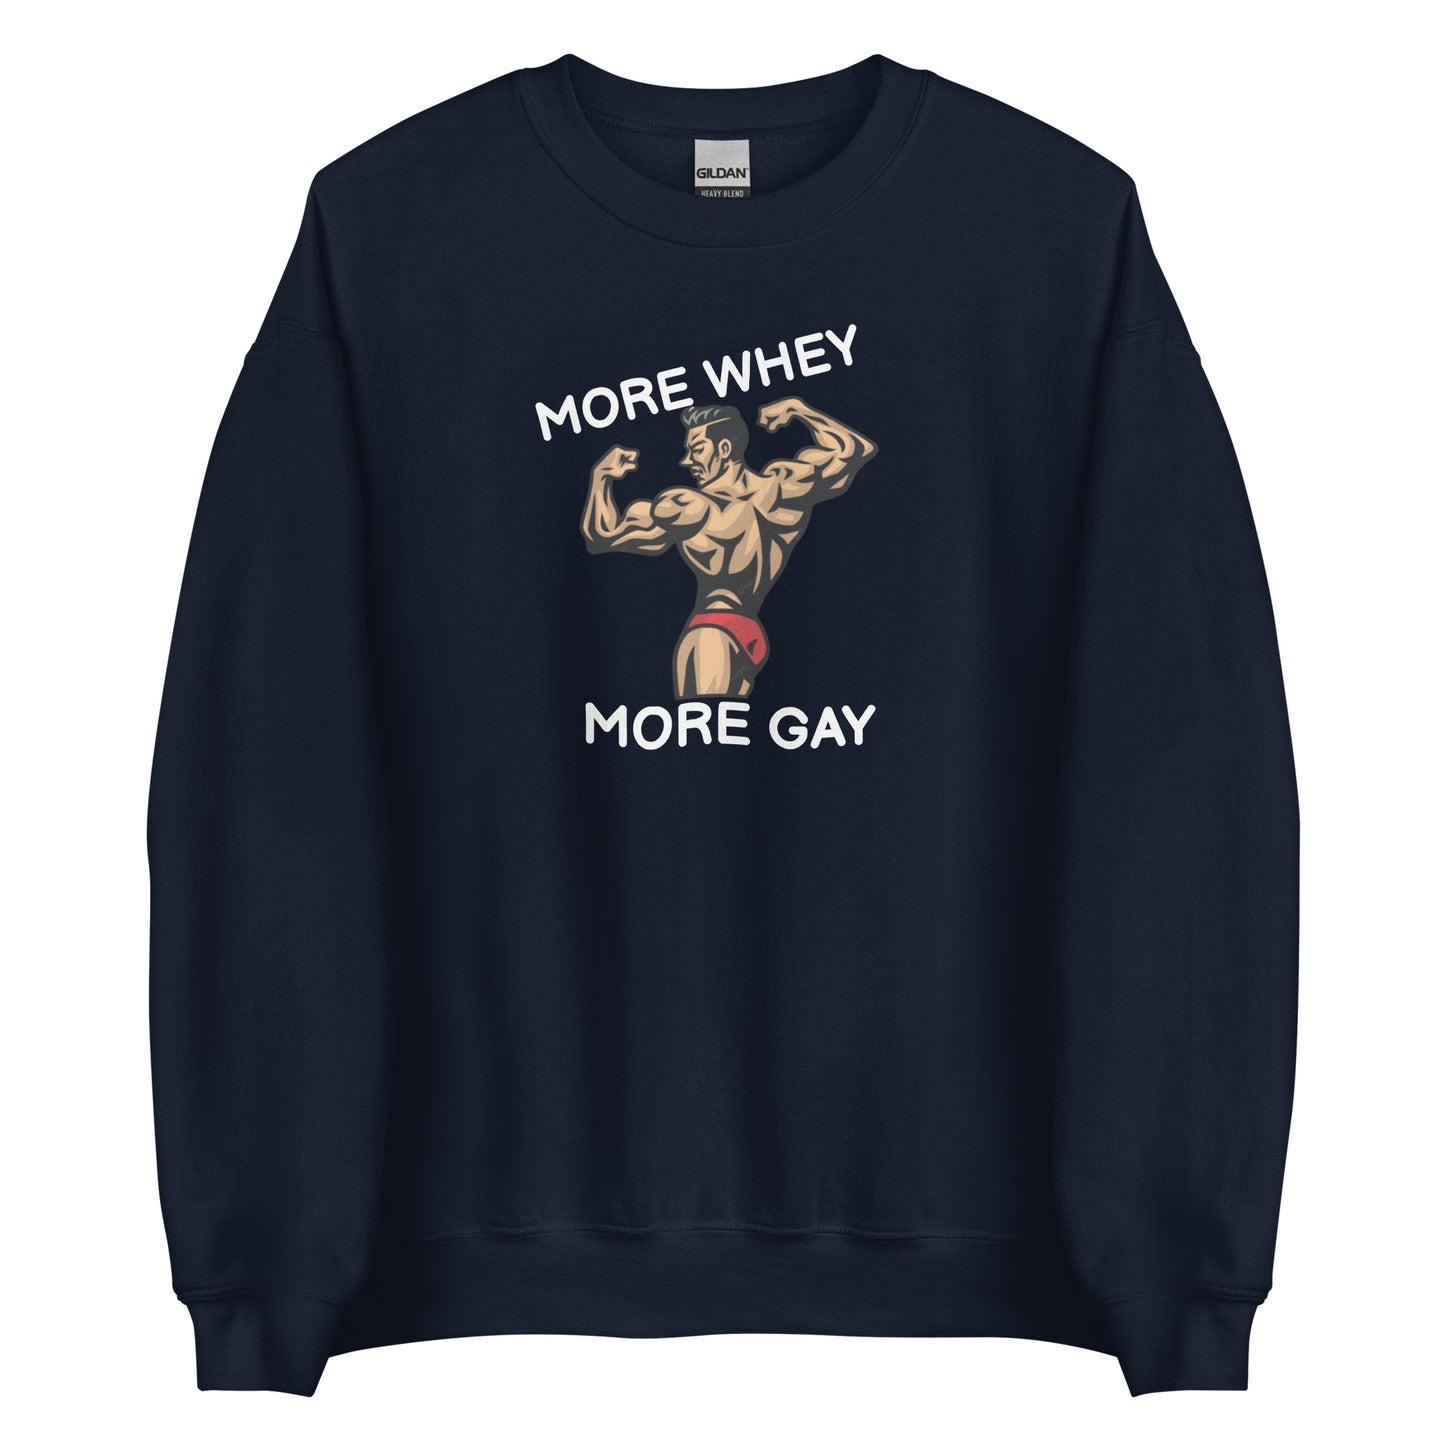 MORE WHEY MORE GAY